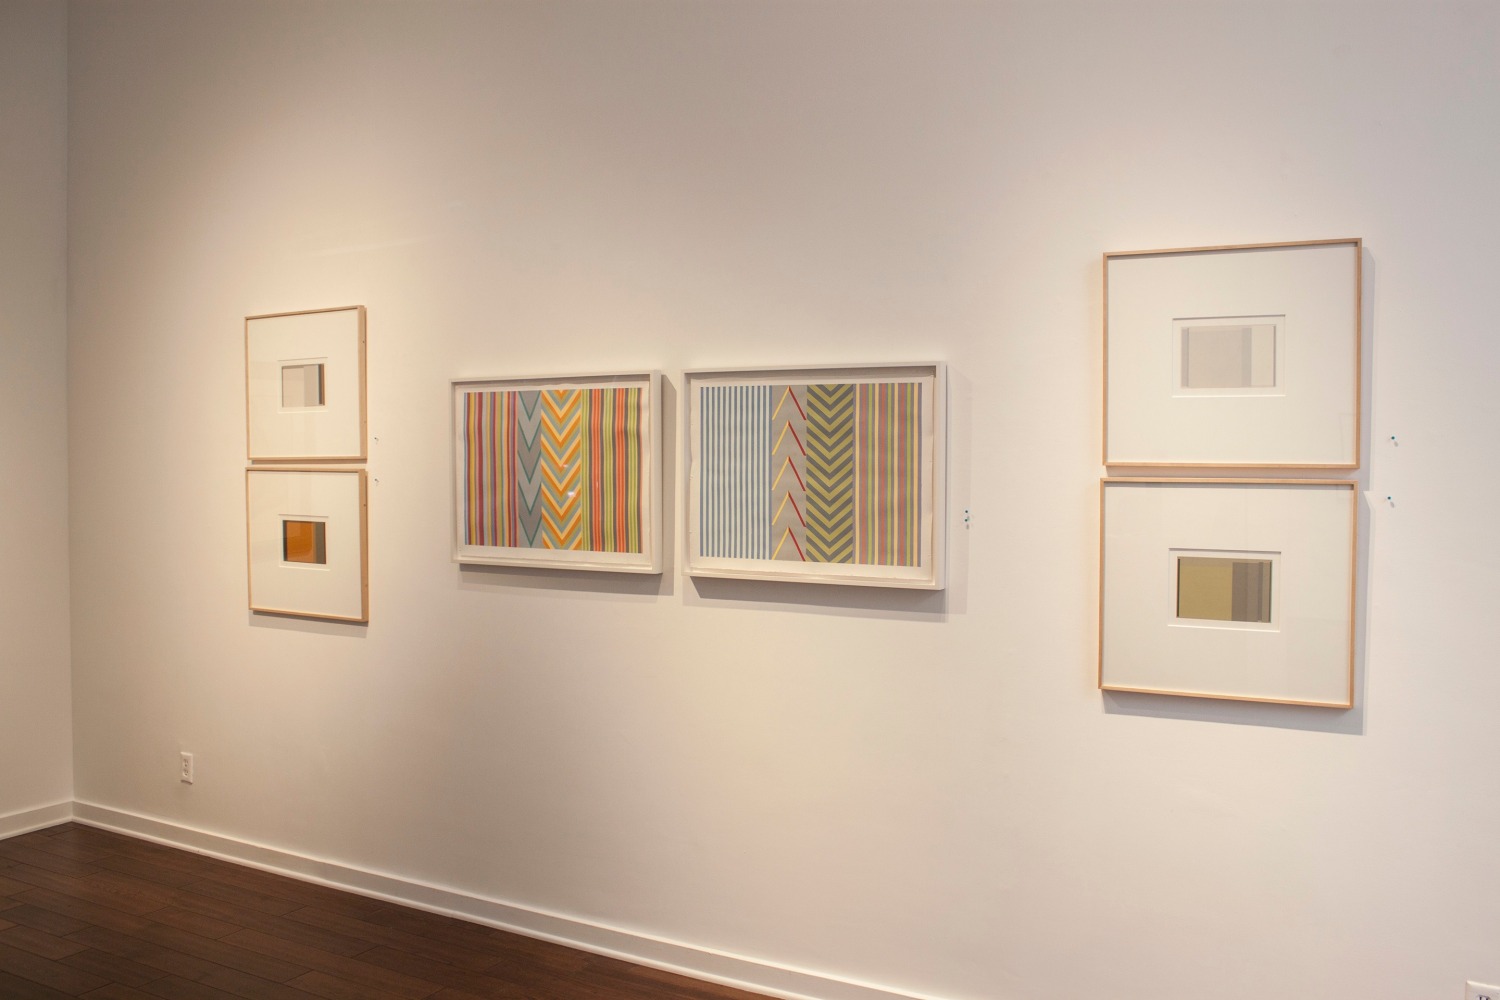 Works on Paper: Selections from the Gallery